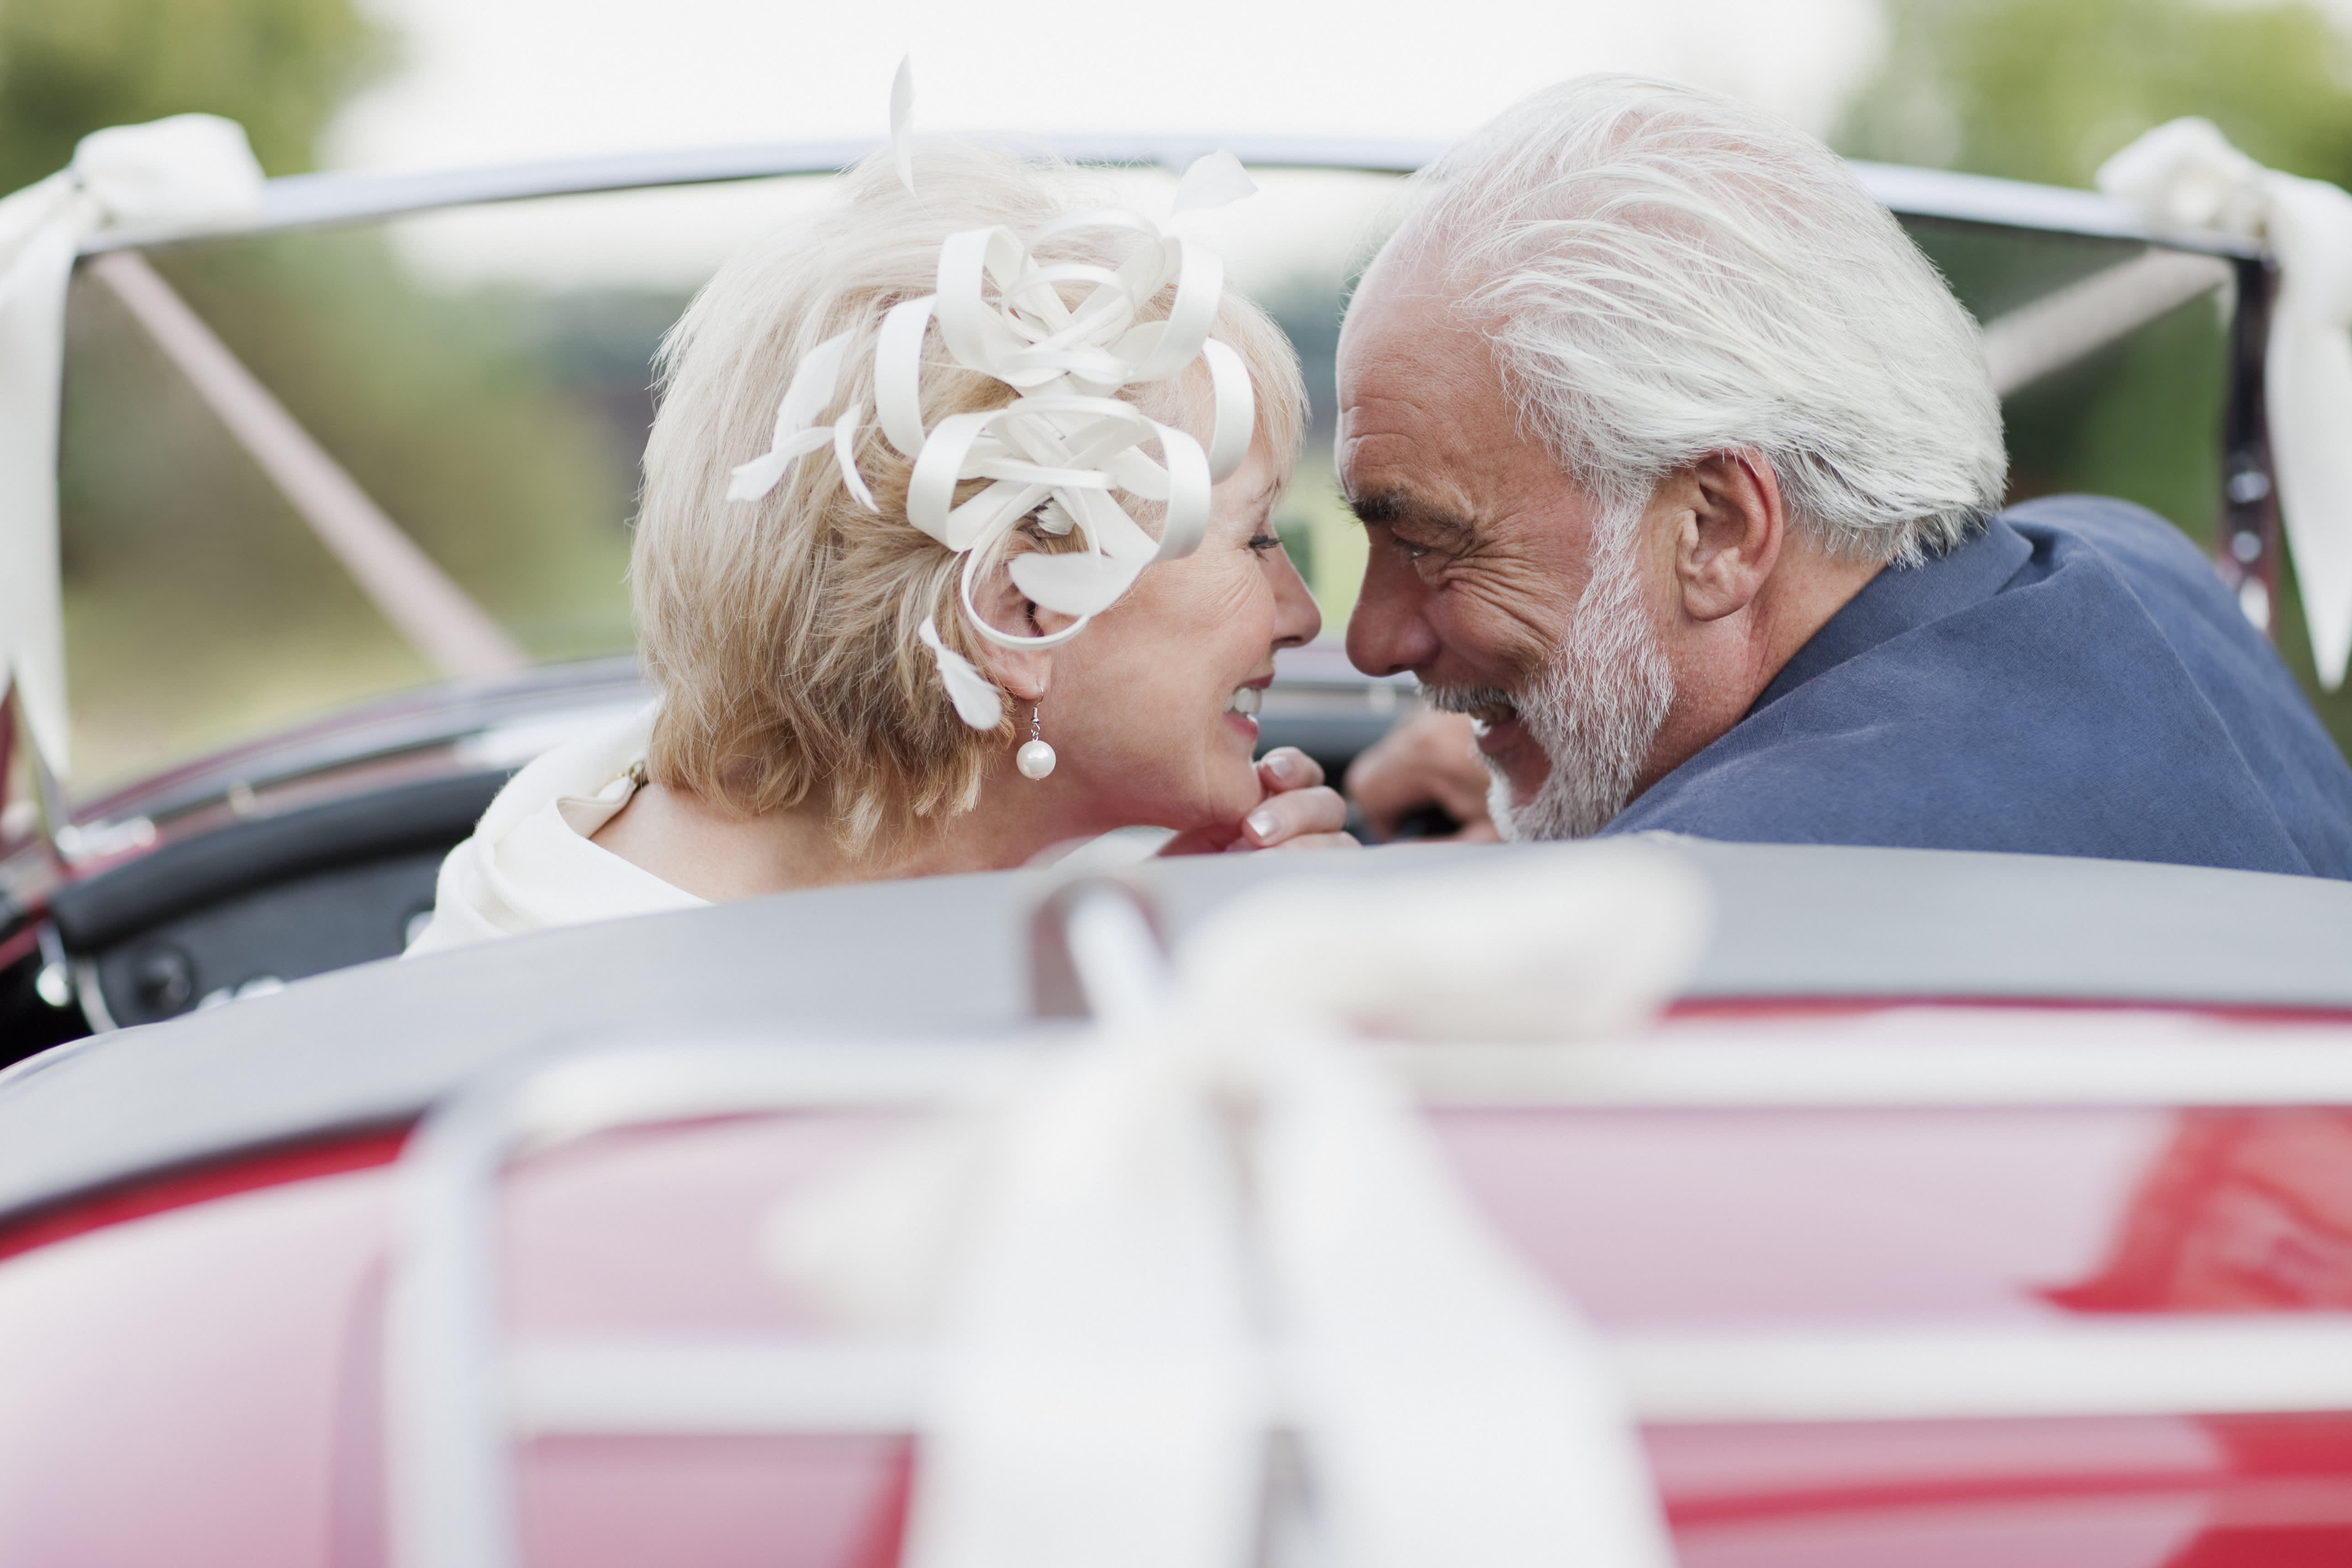 Older and engaged? Here are 5 considerations before marrying